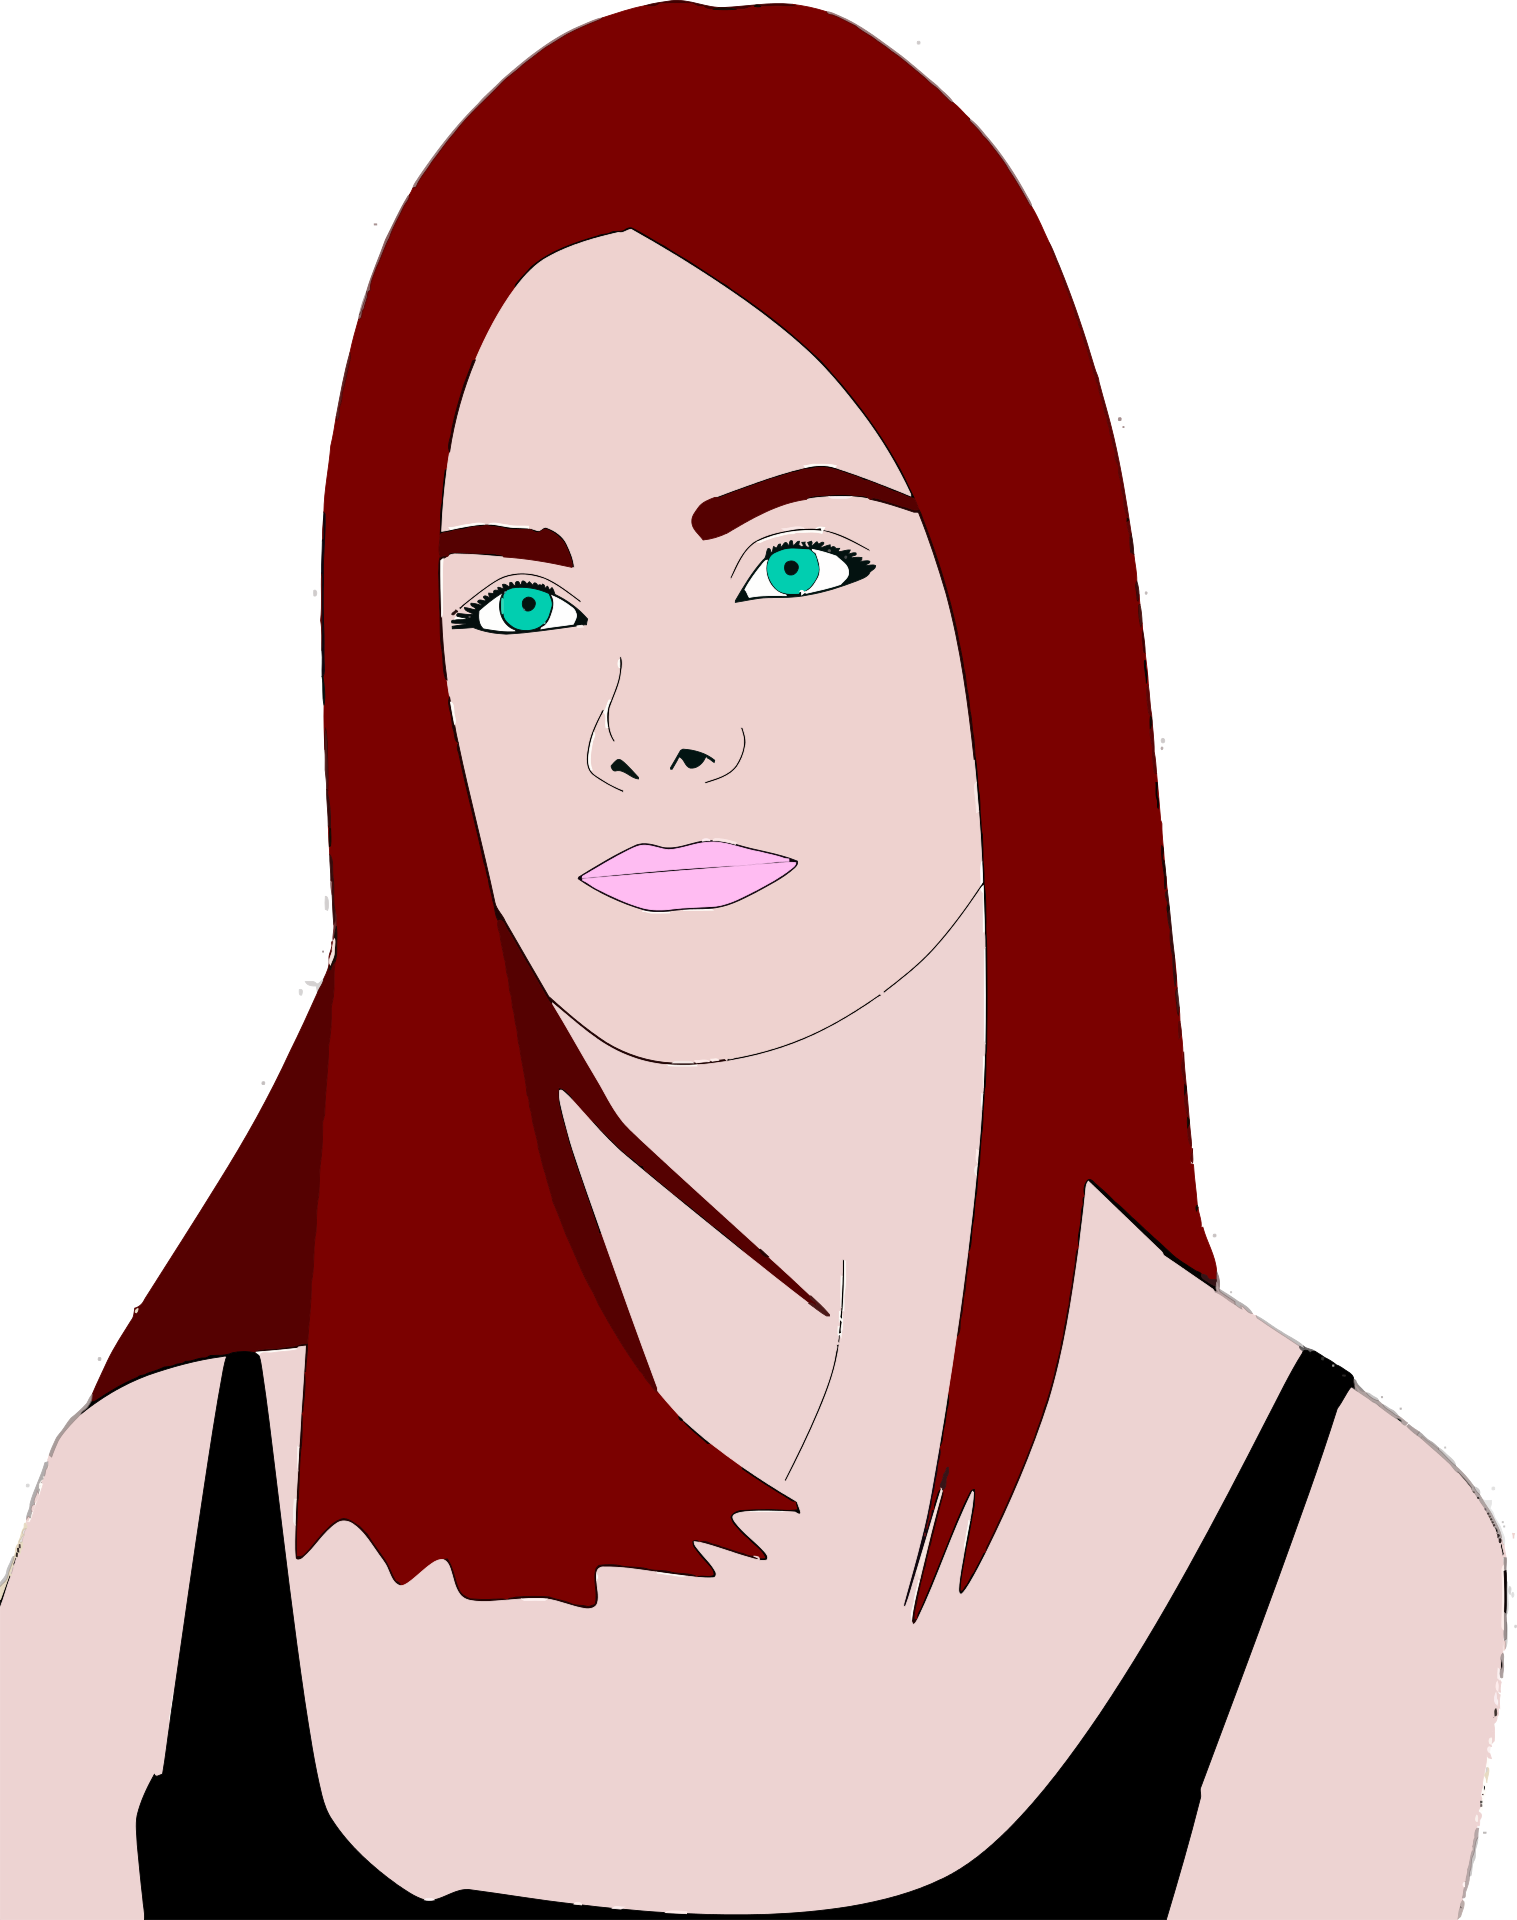 Drawing Of A Girl With Red Hair And Green Eyes Free Image Download 5228